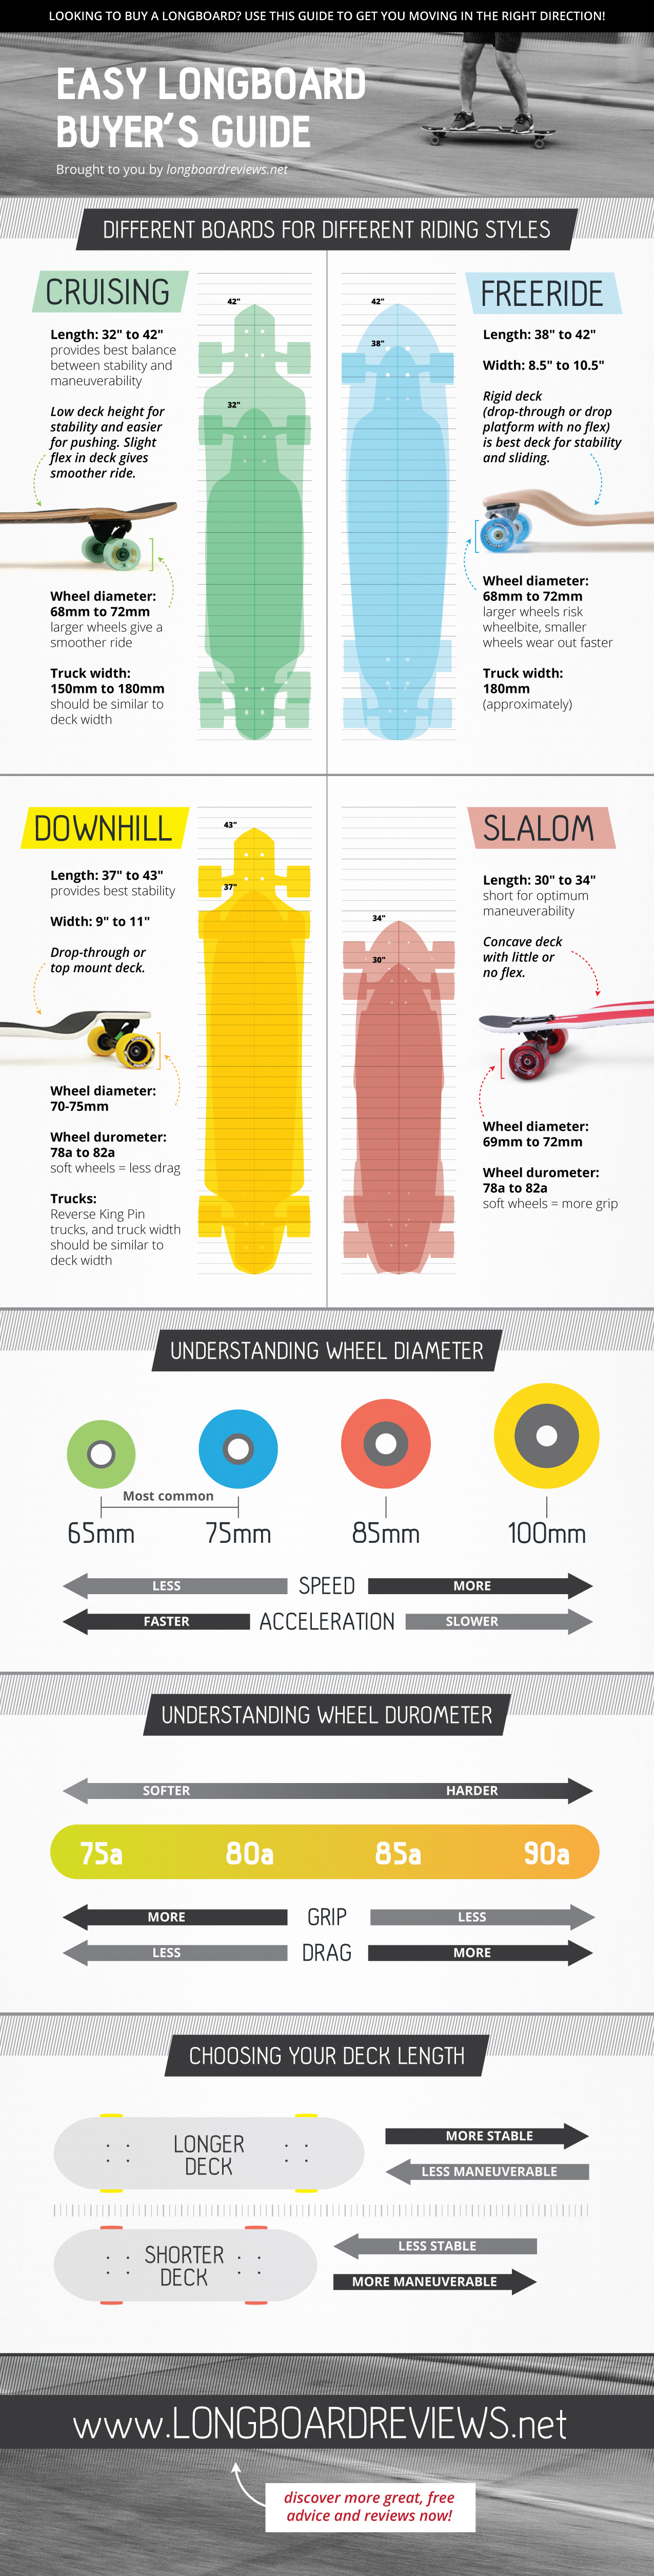 Easy Longboard Buyers Guide infographic